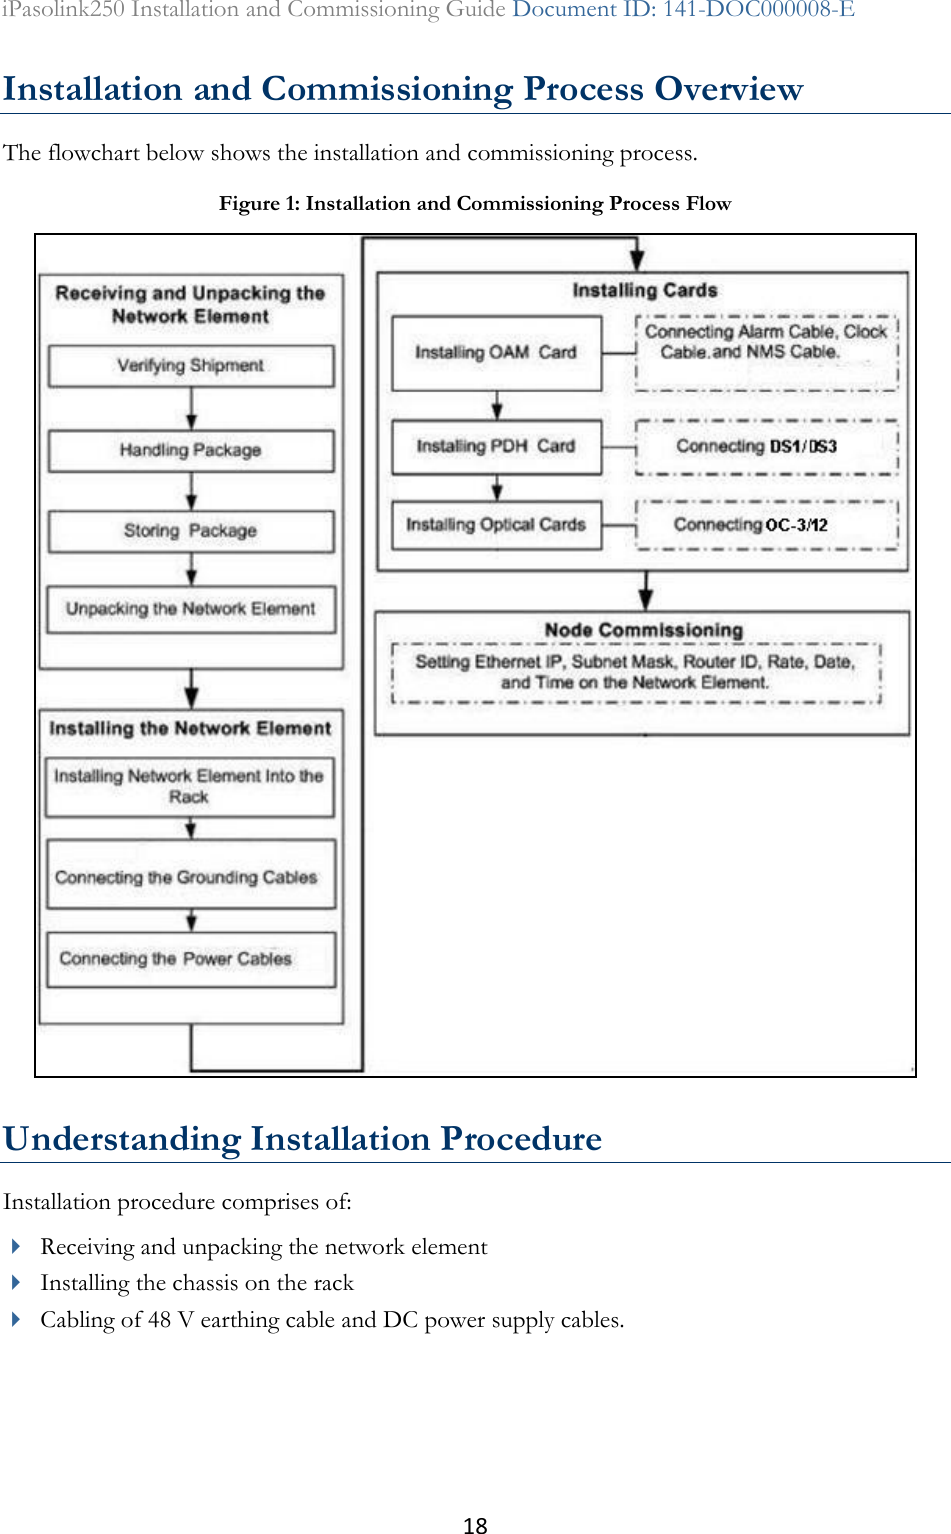 18 iPasolink250 Installation and Commissioning Guide Document ID: 141-DOC000008-E  Installation and Commissioning Process Overview The flowchart below shows the installation and commissioning process.  Understanding Installation Procedure Installation procedure comprises of:  Receiving and unpacking the network element  Installing the chassis on the rack   Cabling of 48 V earthing cable and DC power supply cables.  Figure 1: Installation and Commissioning Process Flow  